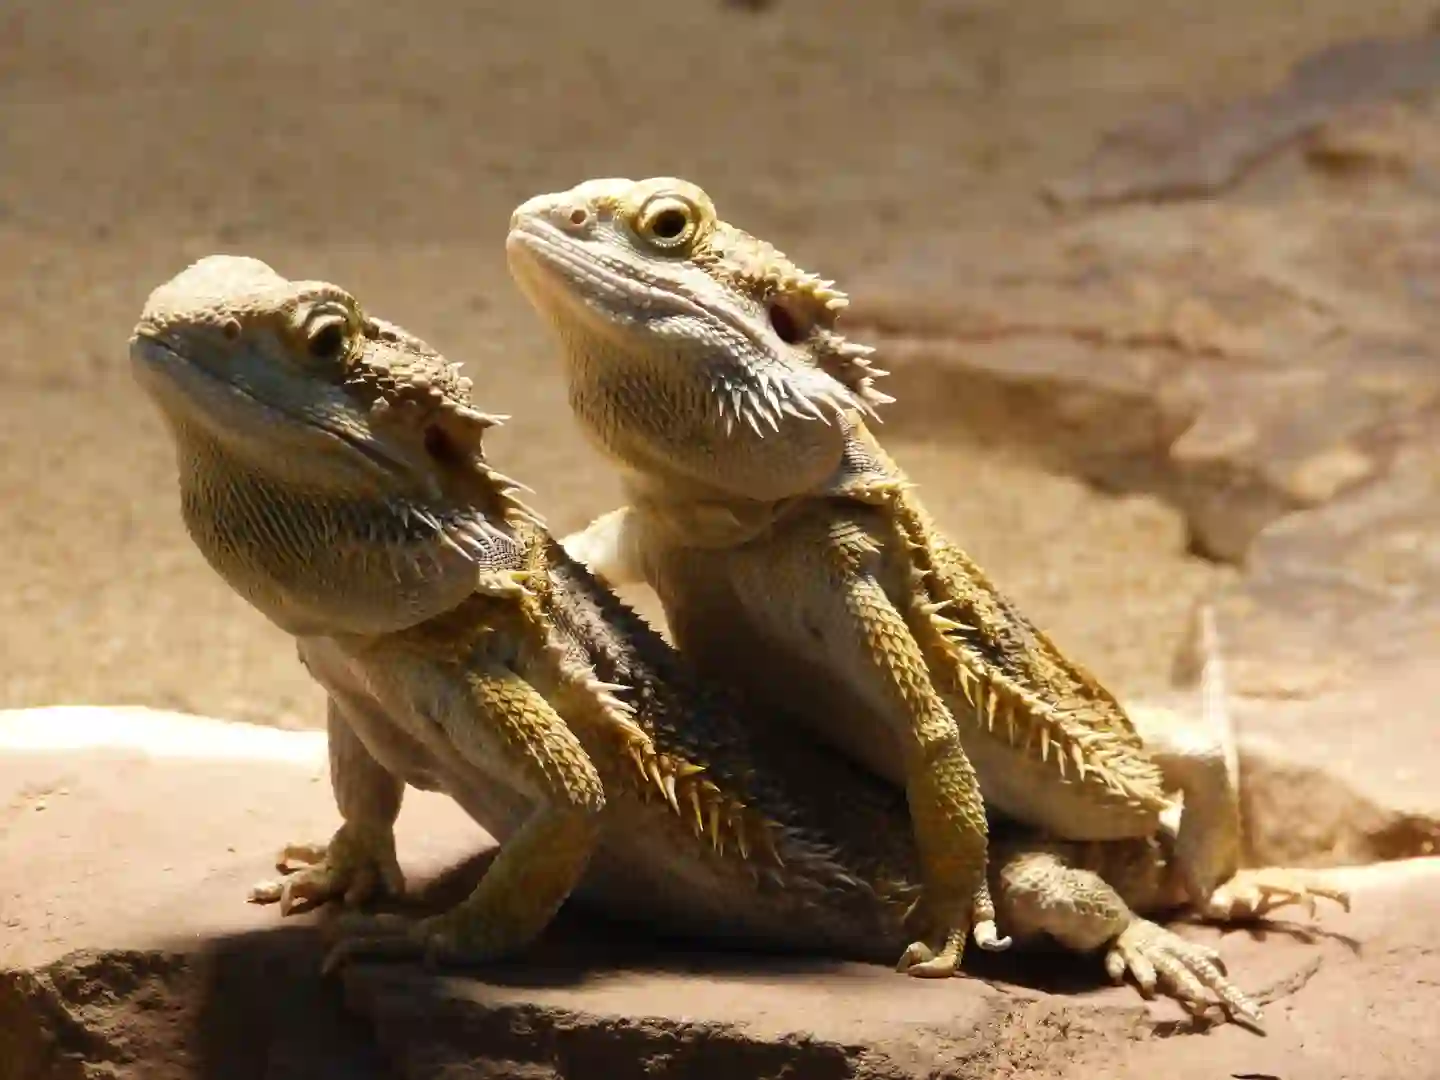 How To Tell If A Bearded Dragon Is Sick?